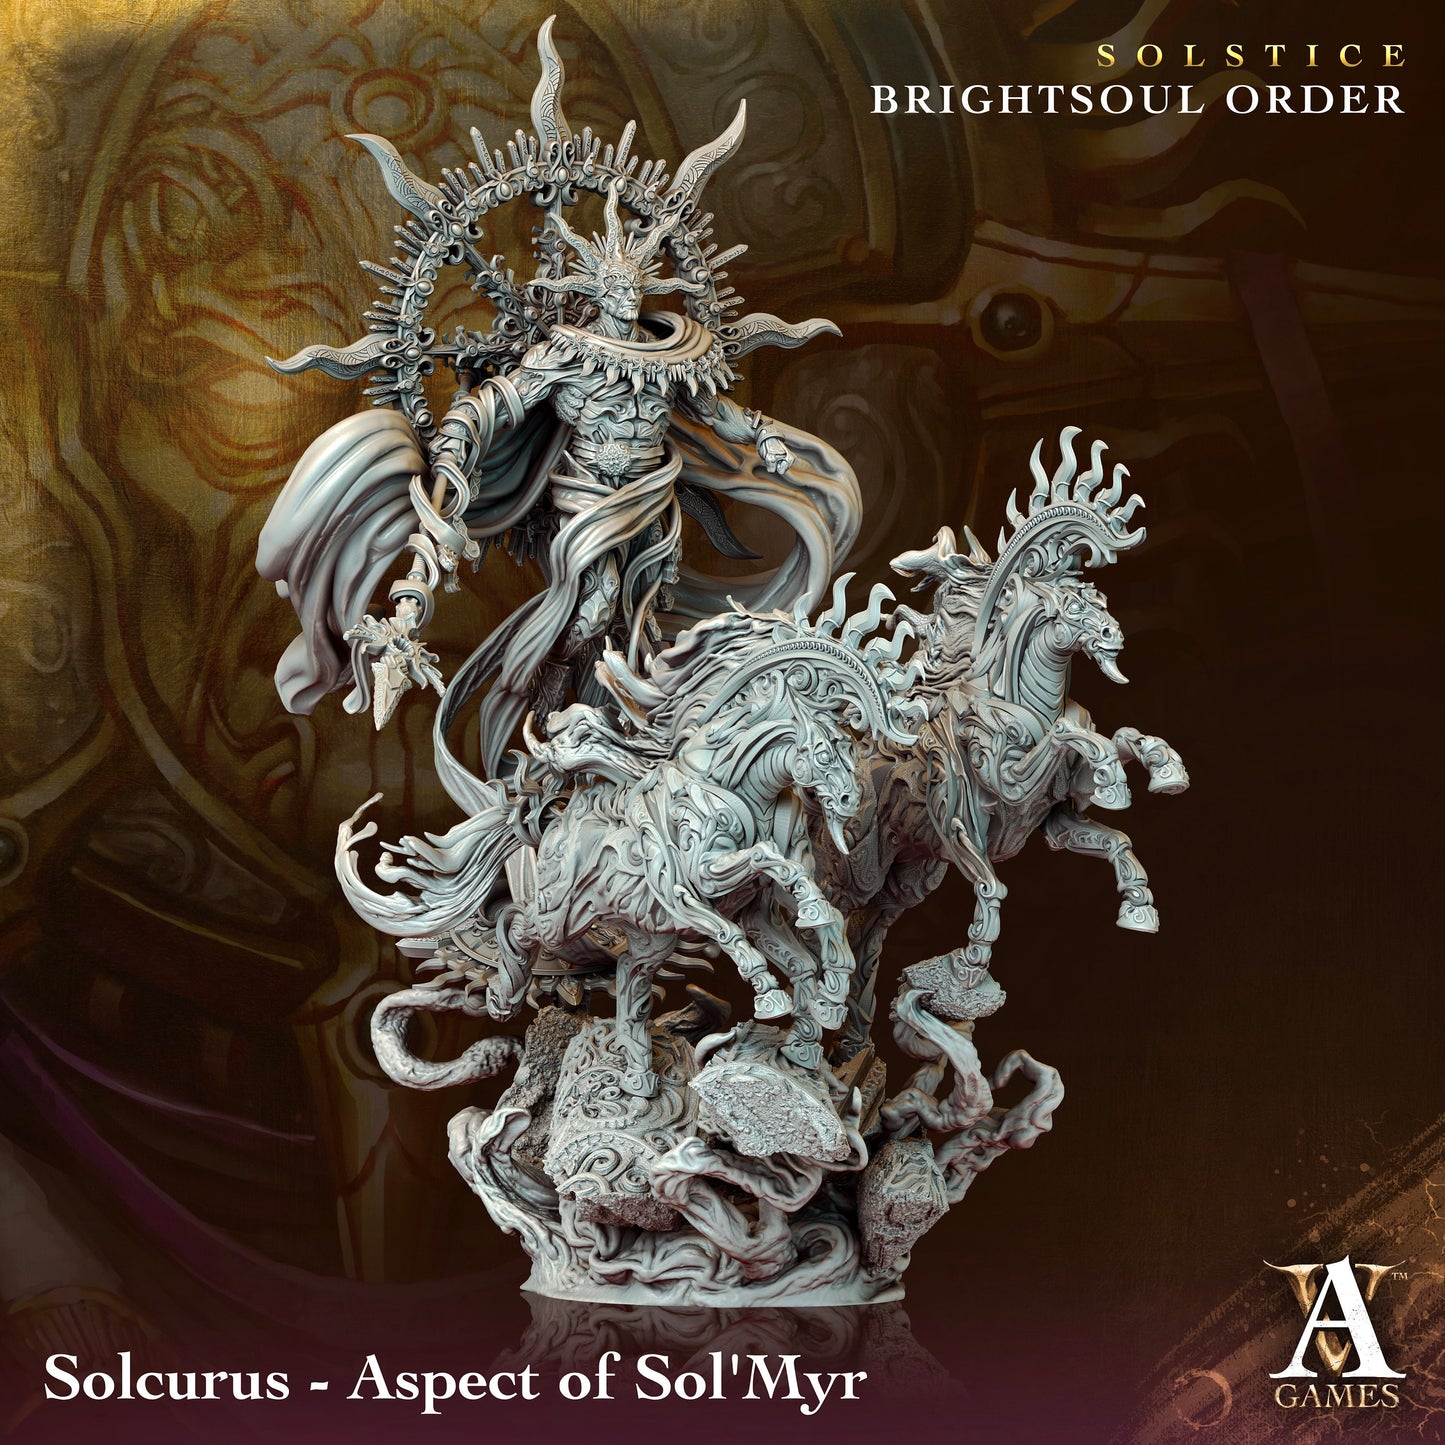 Solcurus, Aspect of Sol' Myr - Brightsoul Order - Highly Detailed Resin 8k 3D Printed Miniature